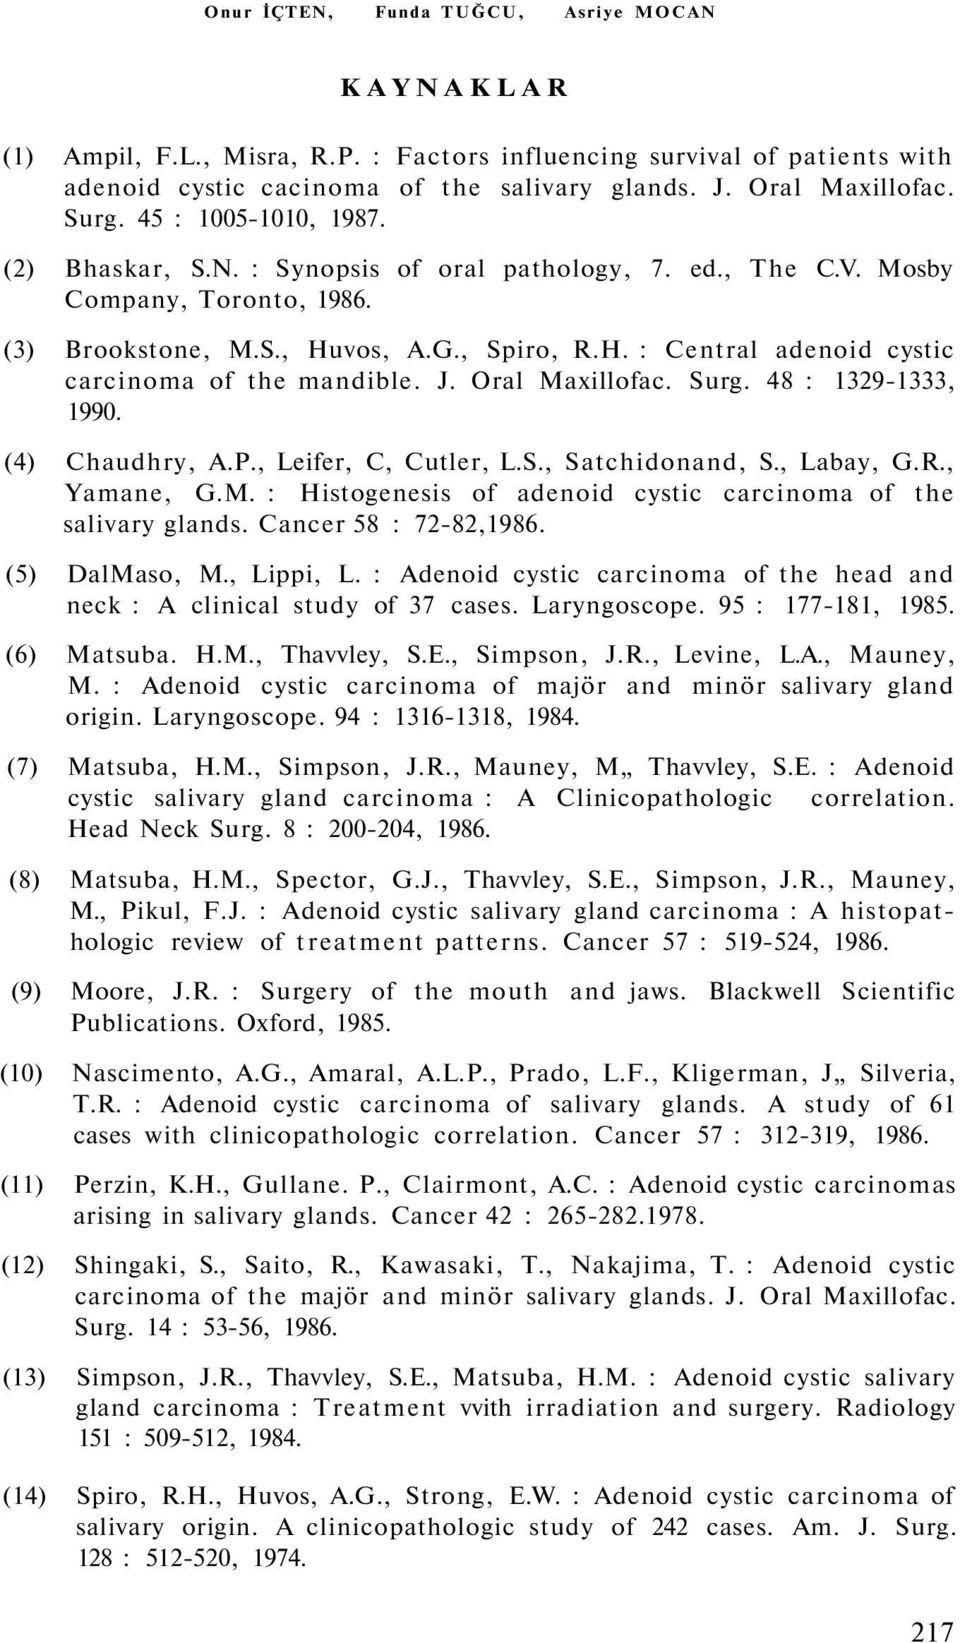 J. Oral Maxillofac. Surg. 48 : 1329-1333, 1990. (4) Chaudhry, A.P., Leifer, C, Cutler, L.S., Satchidonand, S., Labay, G.R., Yamane, G.M. : Histogenesis of adenoid cystic carcinoma of the salivary glands.